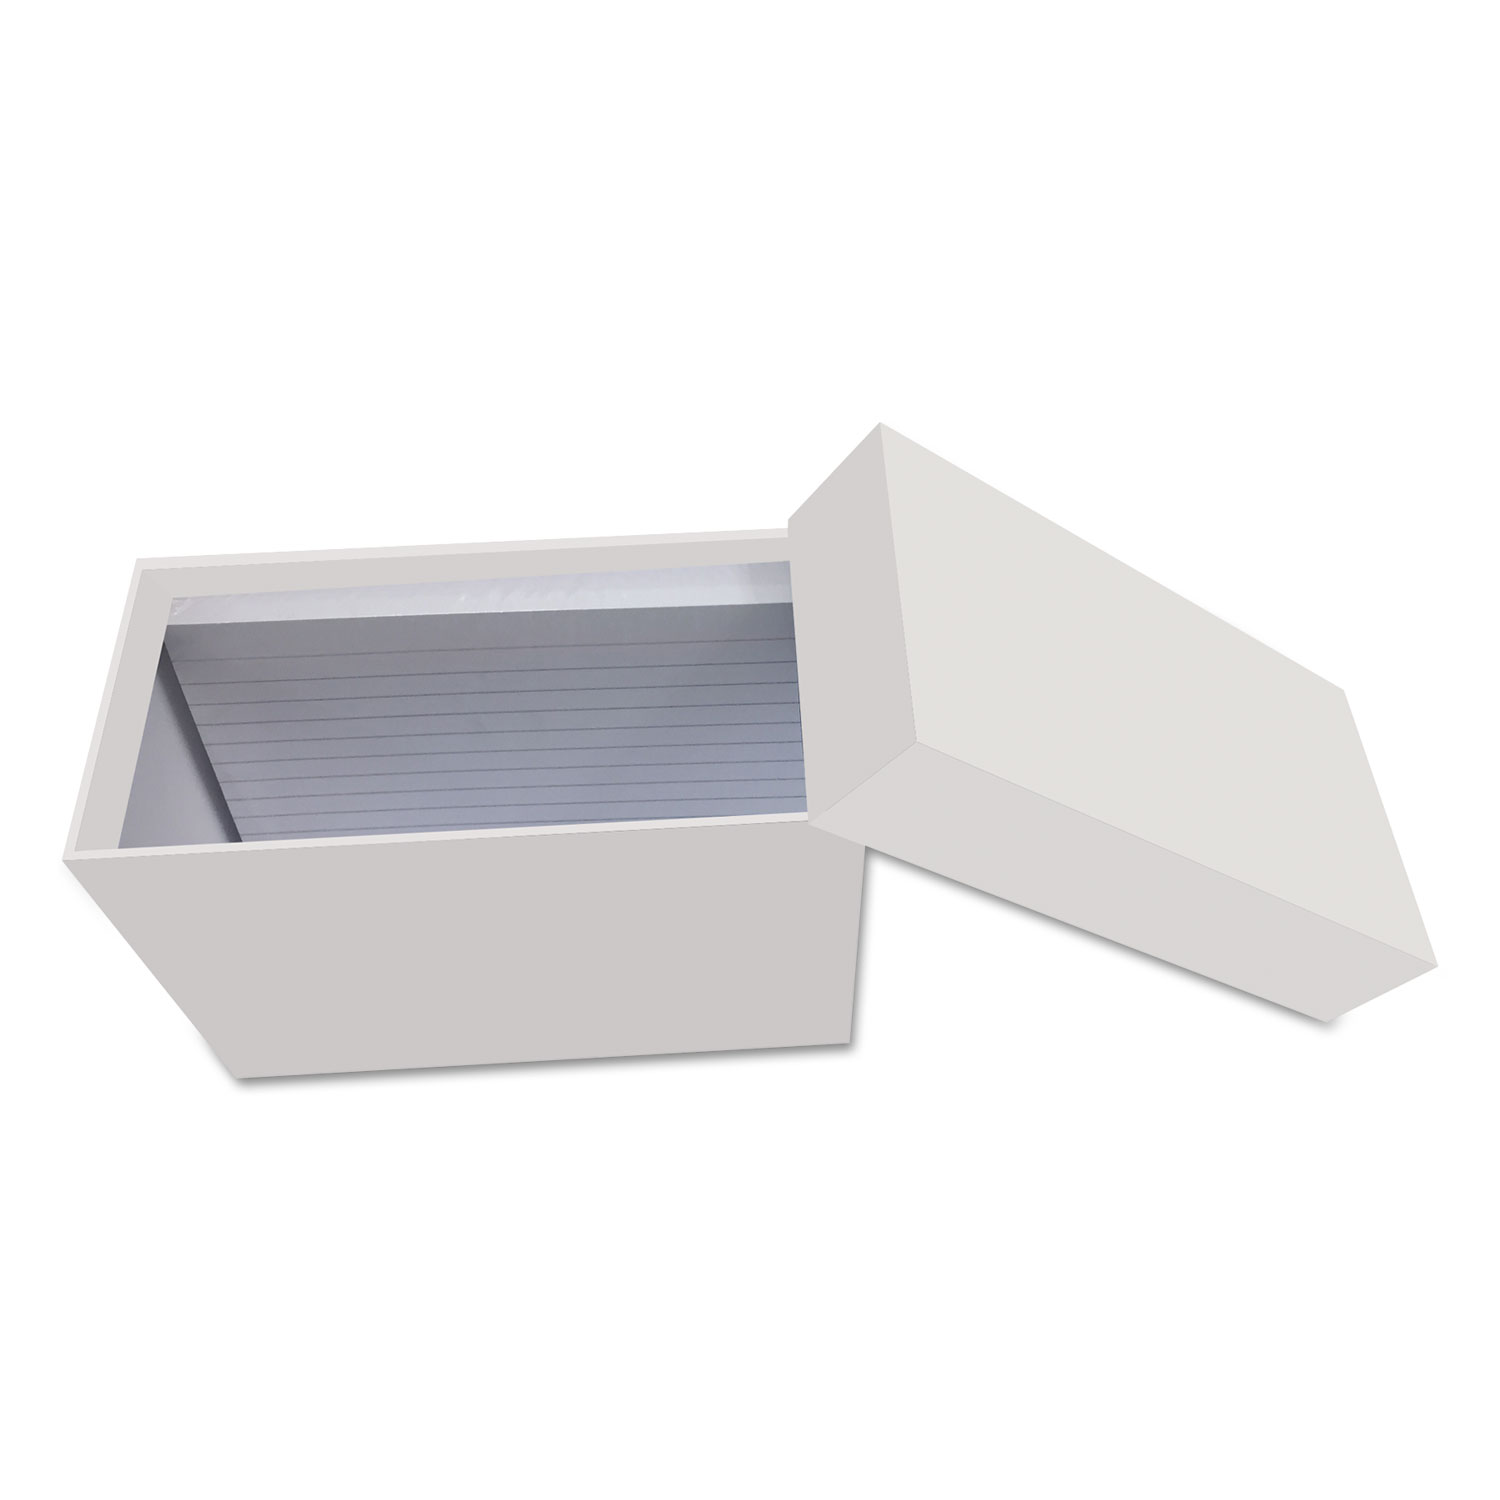 Index Card Box with 100 Ruled Index Cards, 3